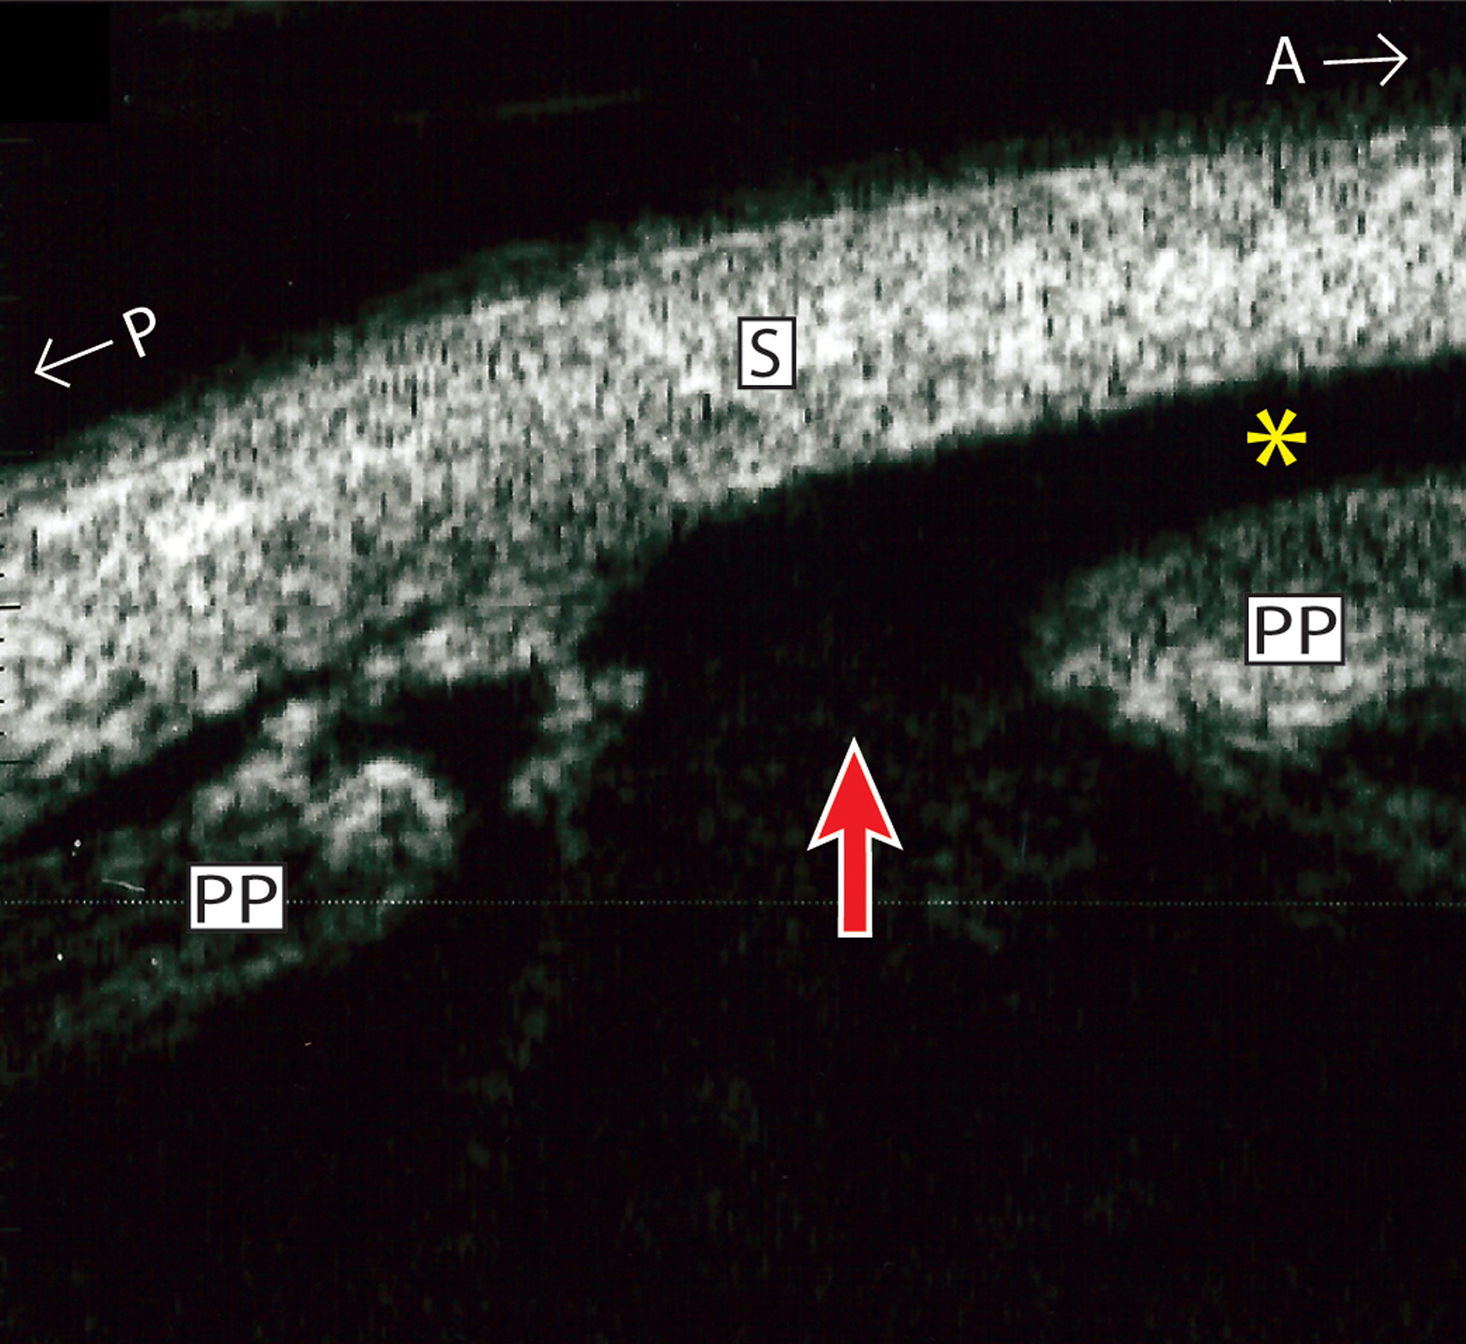 A 66-year-old woman referred for vitreous hemorrhage after cannula dislodgement during cataract surgery wound hydration. A, Transverse B-scan at 7:00 detected a tissue abnormality anteriorly (red arrow). B-C, Ultrasound biomicroscopy revealed rupture of the pars plana (red arrow) and subuveal fluid tracking anteriorly (asterisks) at 7:00. D, The lens haptic remains well-positioned (black arrow).